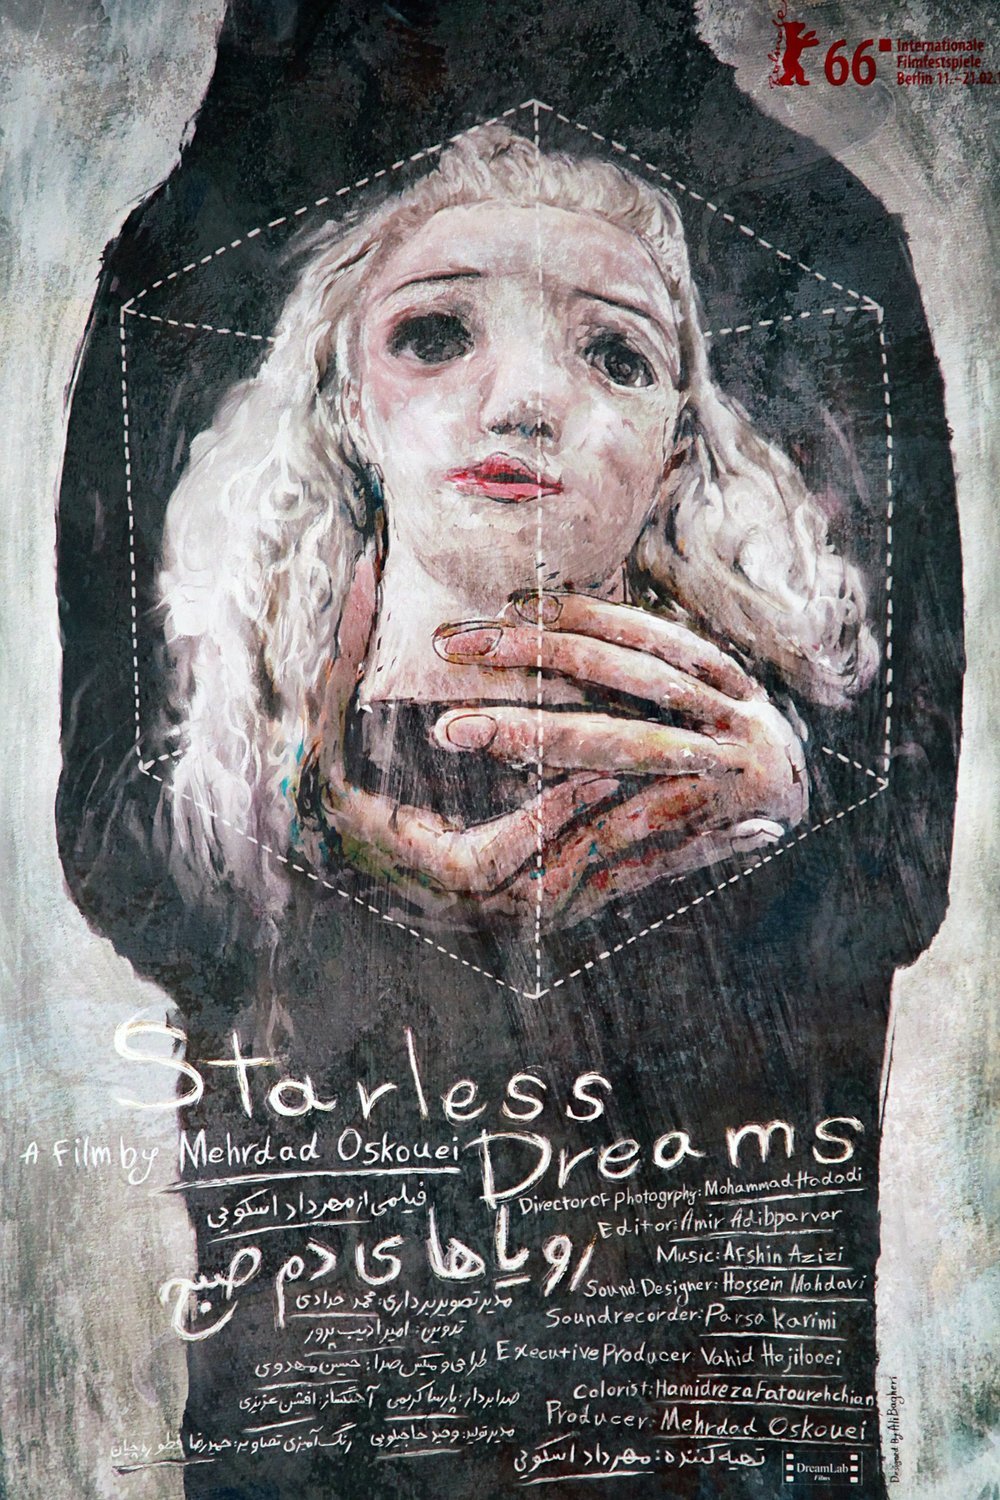 Poster of the movie Starless Dreams